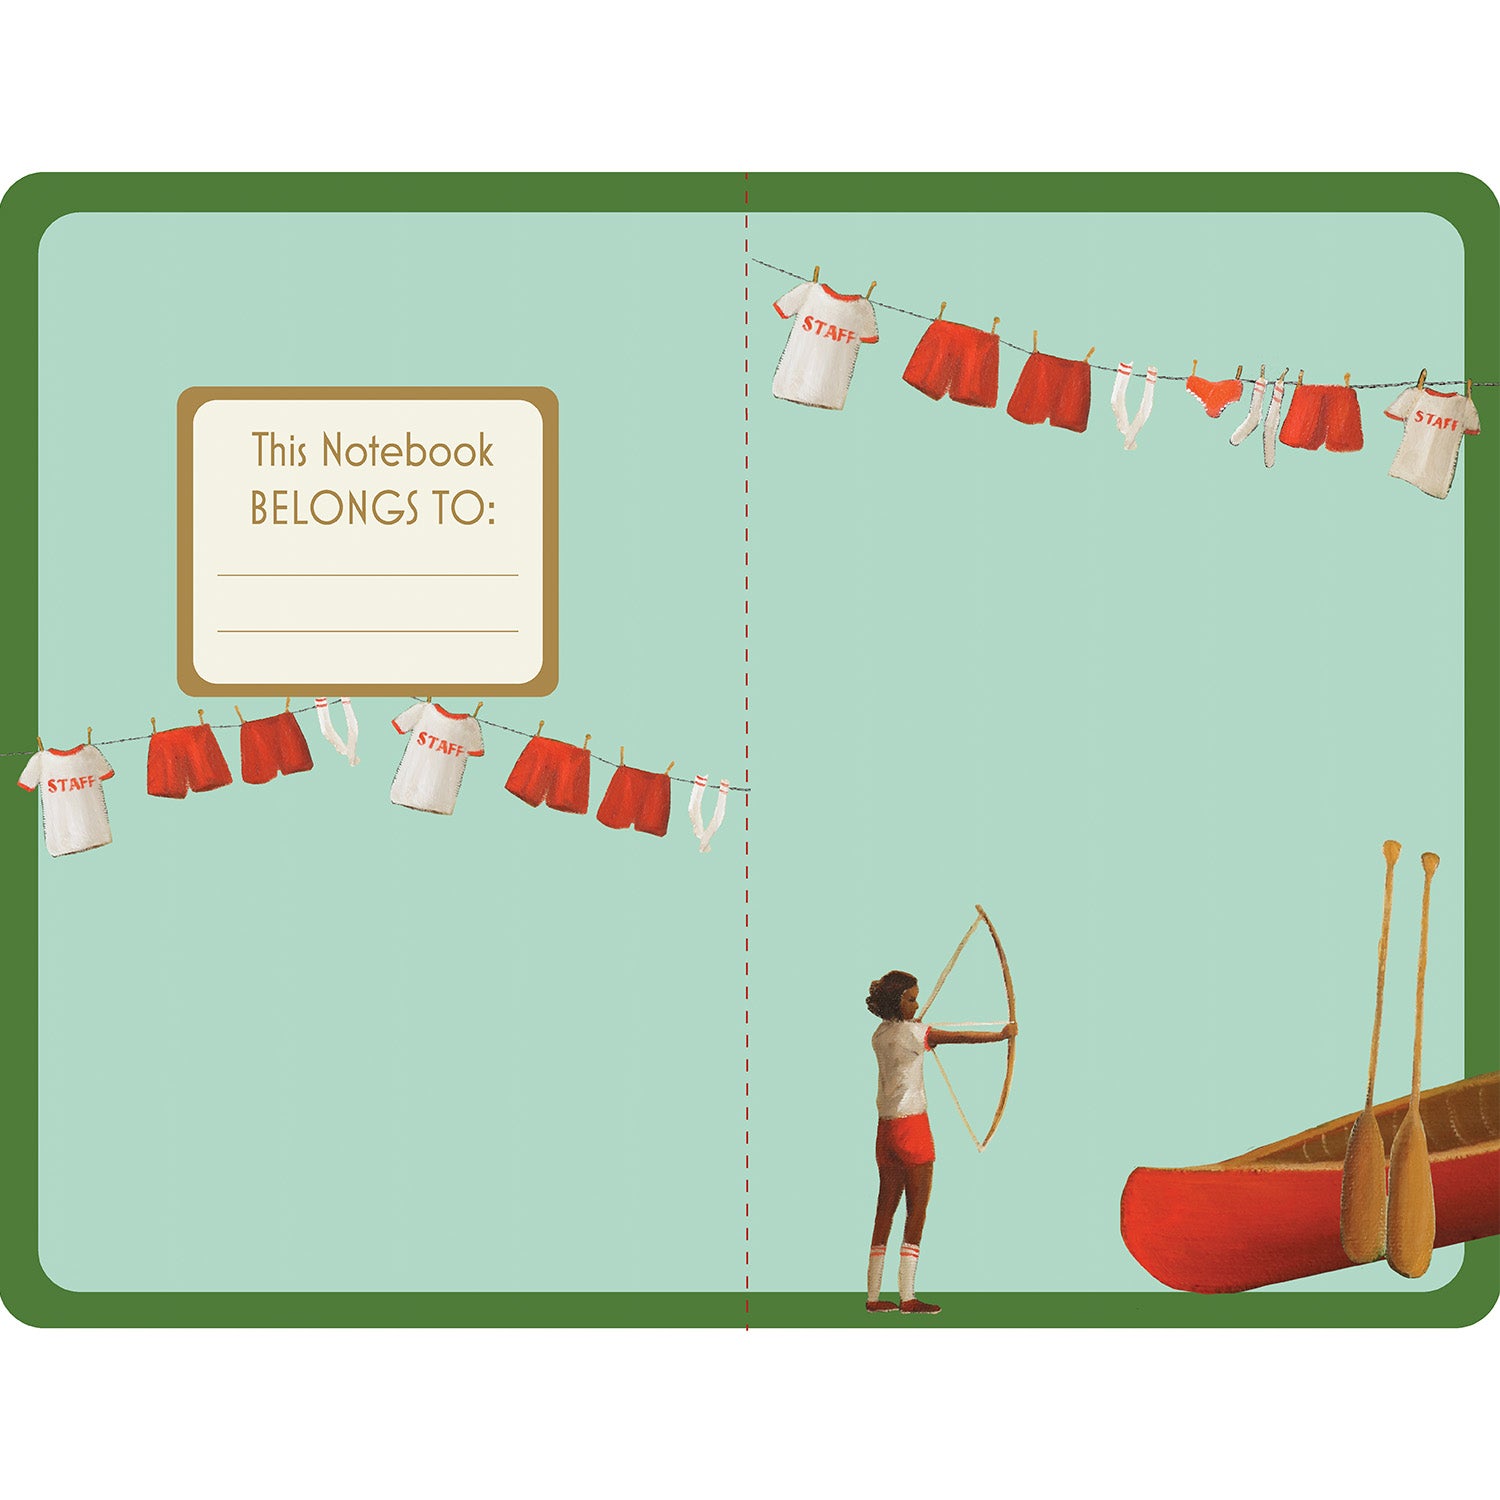 The inside front and back covers of the Summer Camp Notebook features a teal background framed in green, with the clothesline artwork across both sides. The front inner cover is labeled &quot;This Notebook Belongs To:&quot; with blank lines inside a gold frame, and the back cover features the canoe, paddles, and a child pulling a bow.